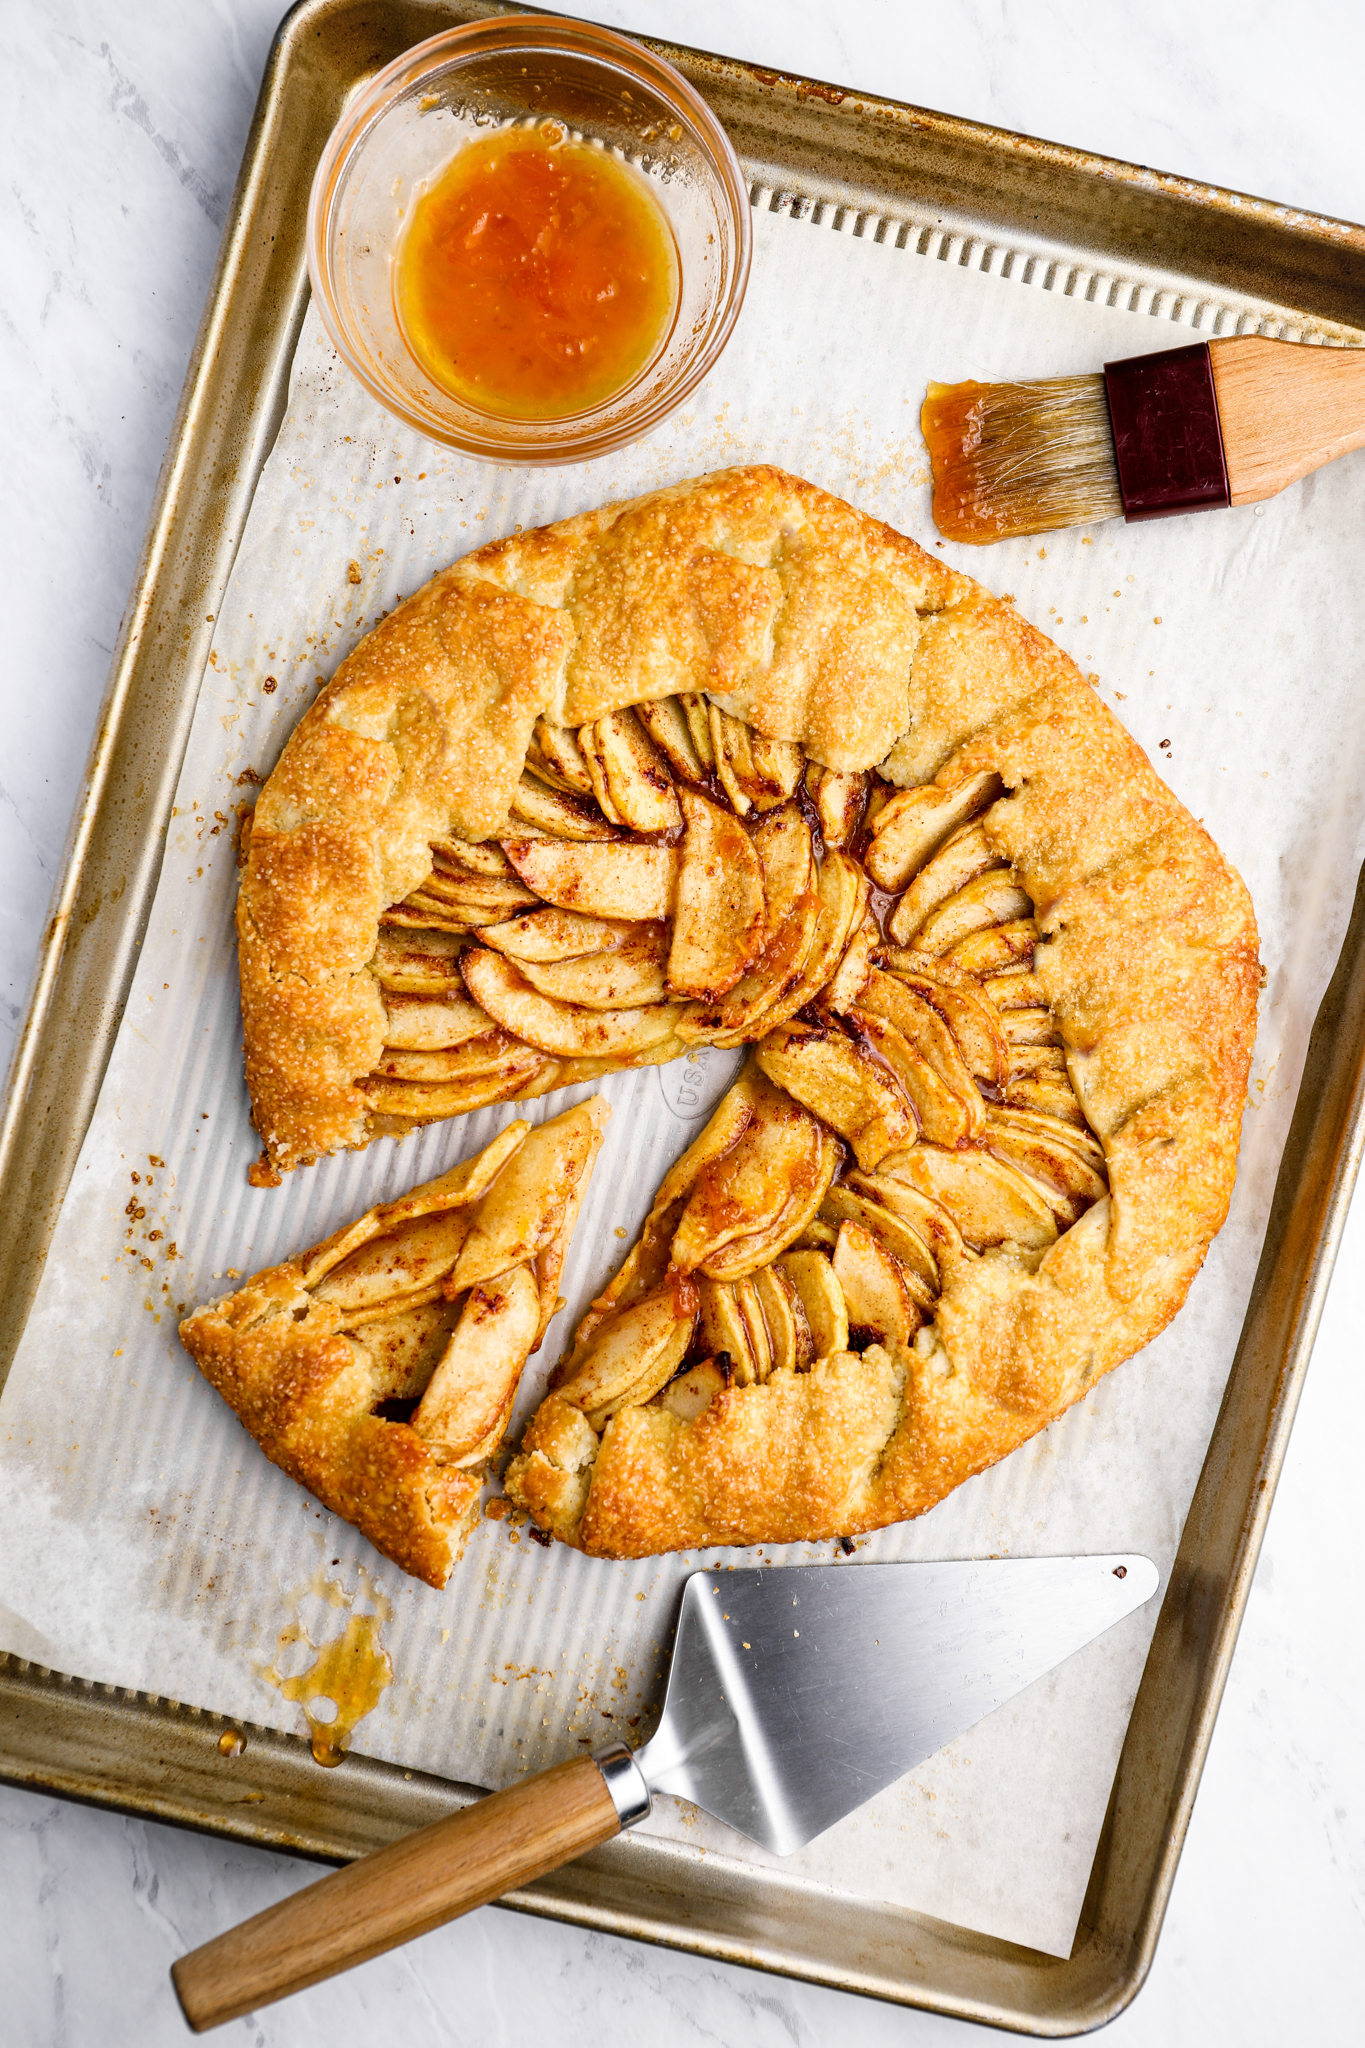 Easy Apple Pie Using Store-Bought Crust (Delicious)